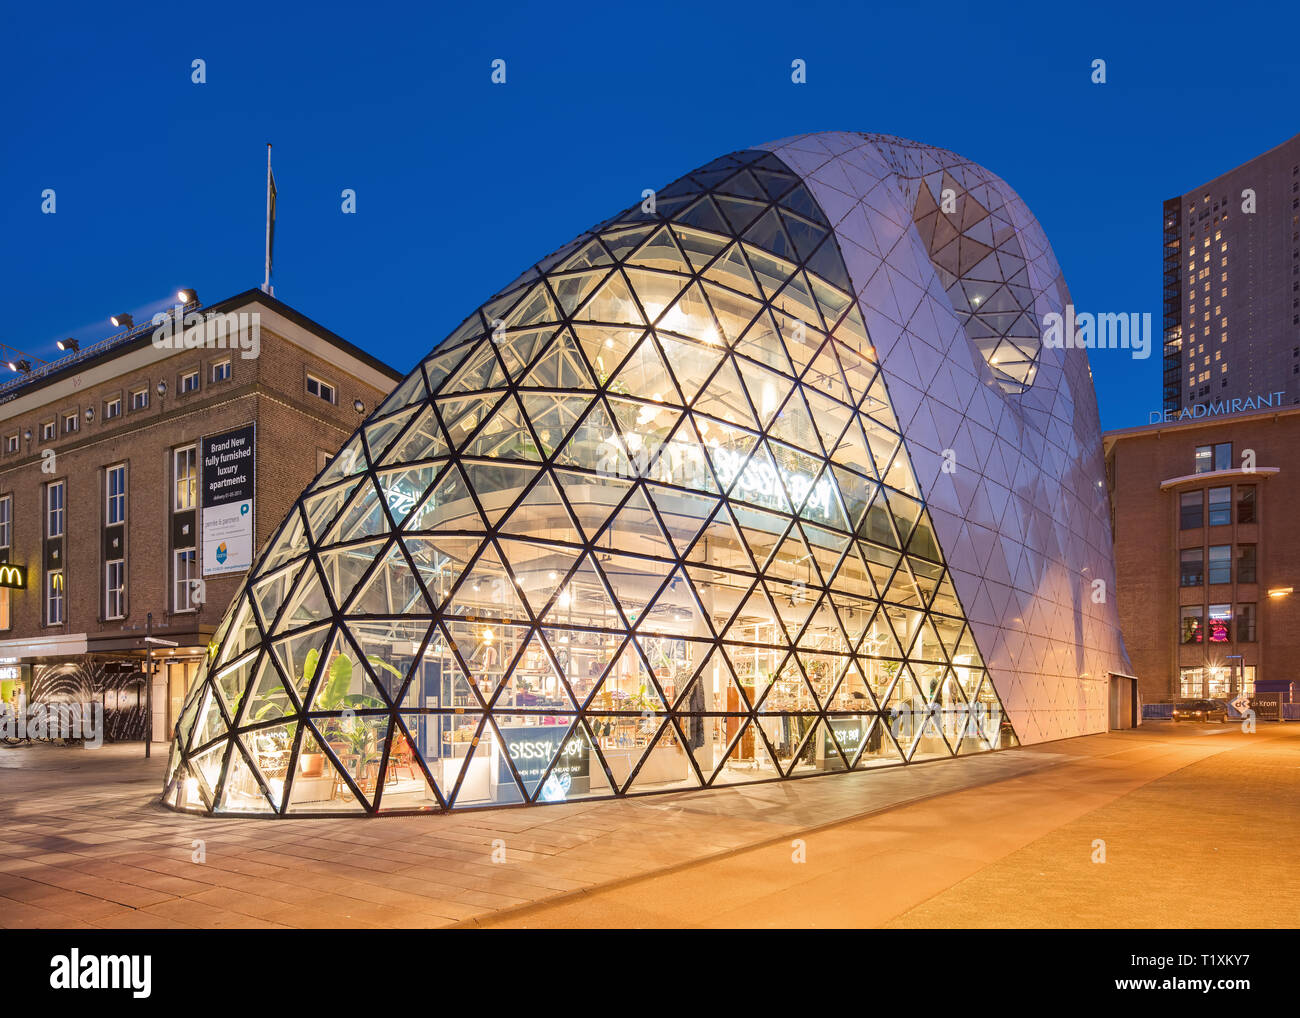 The organic shaped Blob building, a futuristic design by architect Massimiliano Fuksas. It is a landmark in Eindhoven. Stock Photo